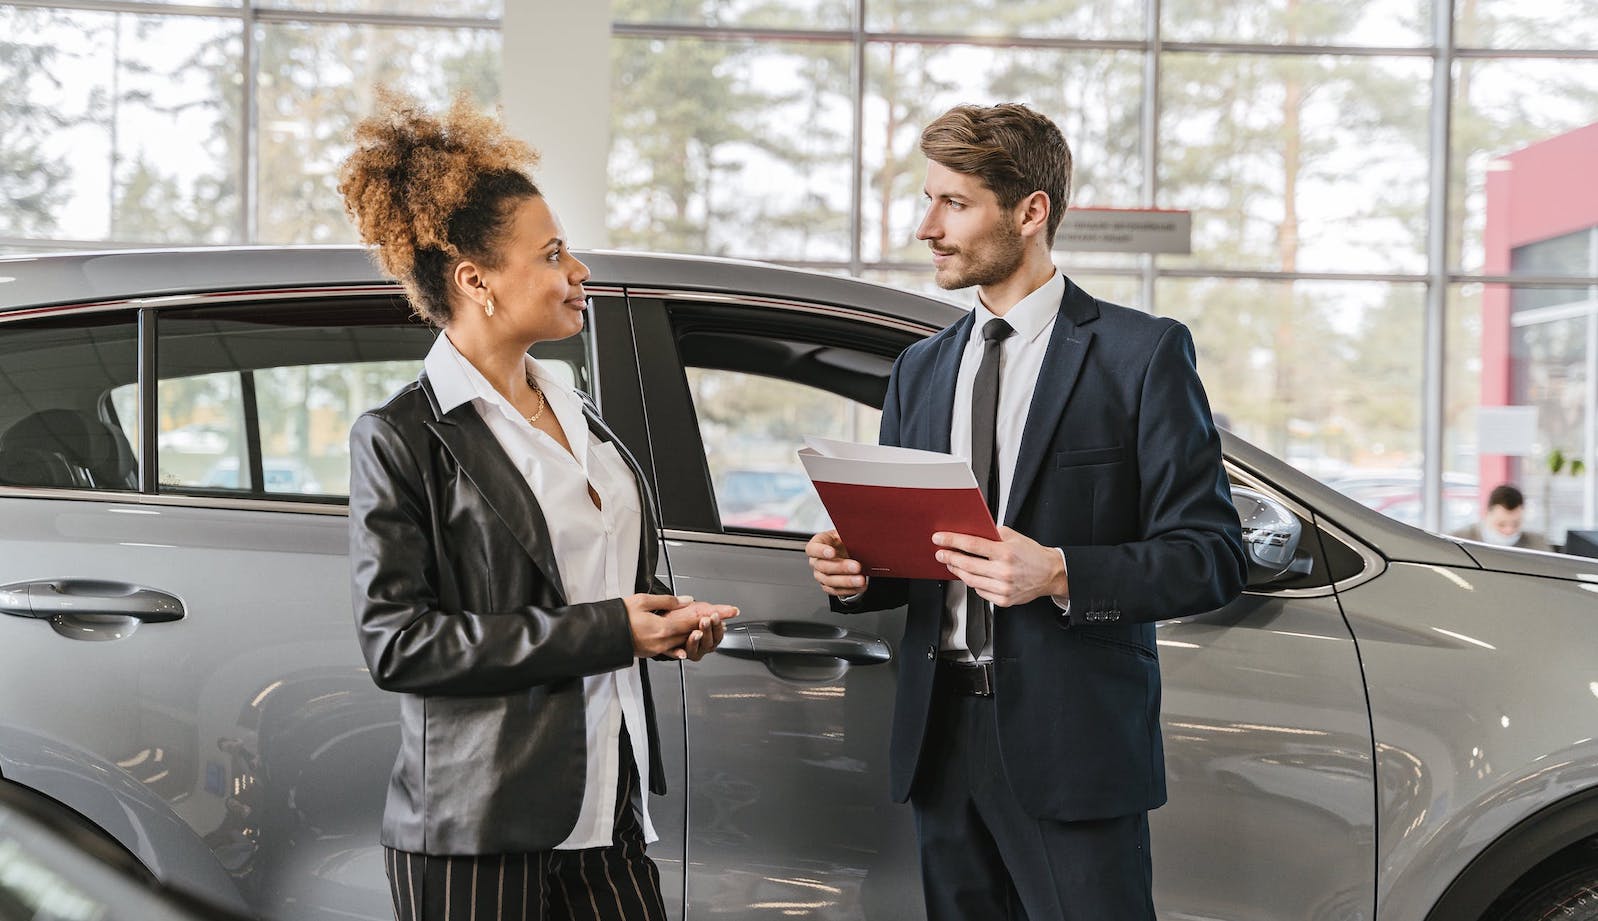 Two people at a car dealership in front of a car and talking to each other